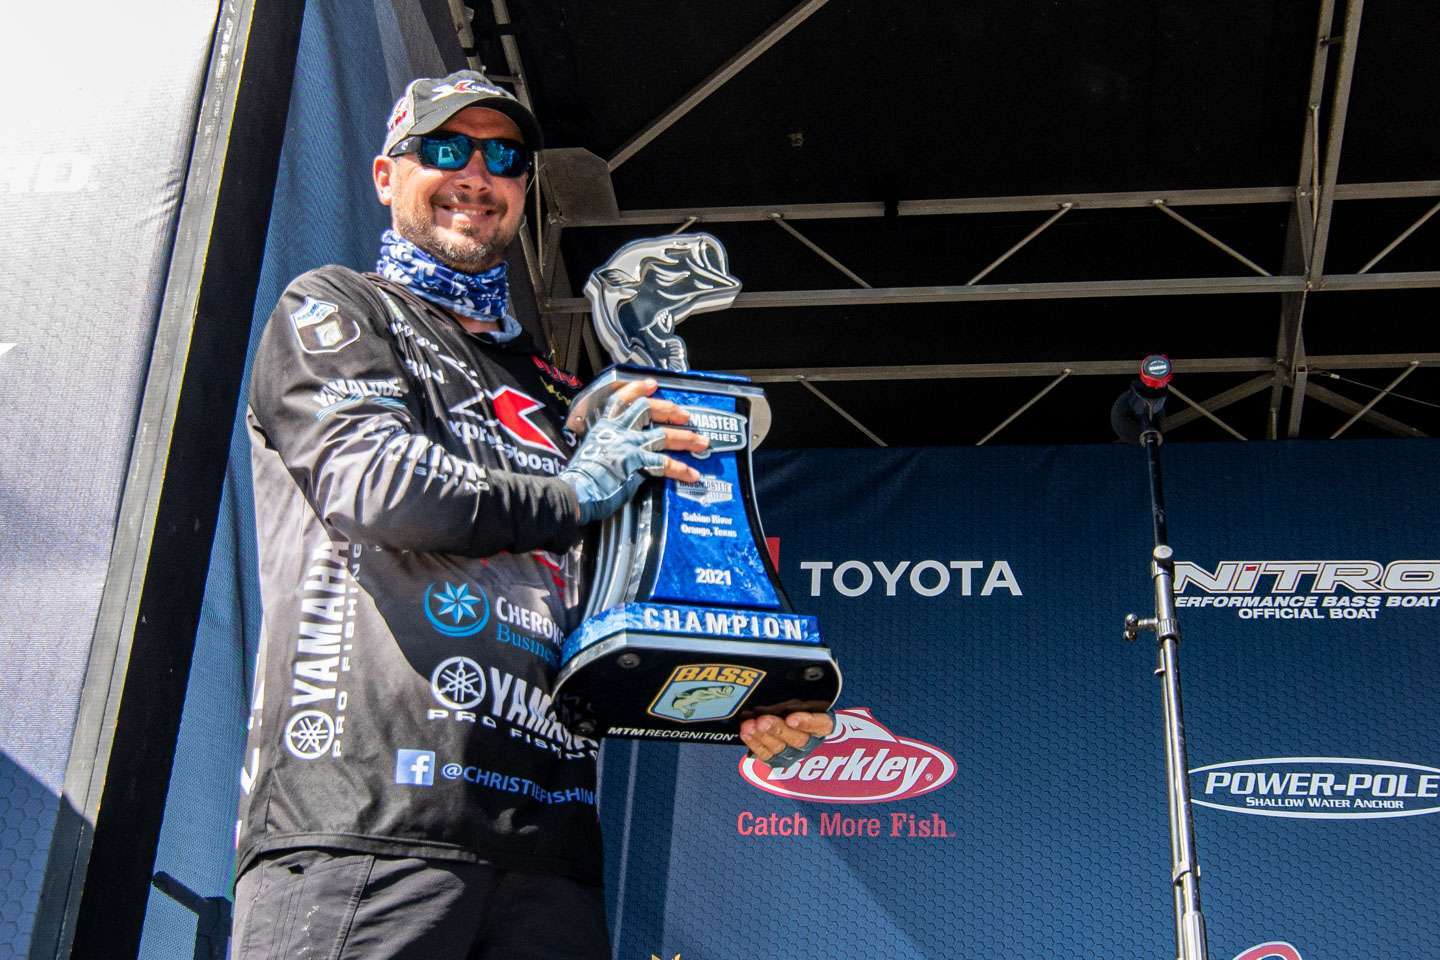 Those anglers were Brock Mosley, the runner-up, and Jason Christie, hoisting his sixth Bassmaster trophy. See the baits of the top finishers, and try them out this spring.  